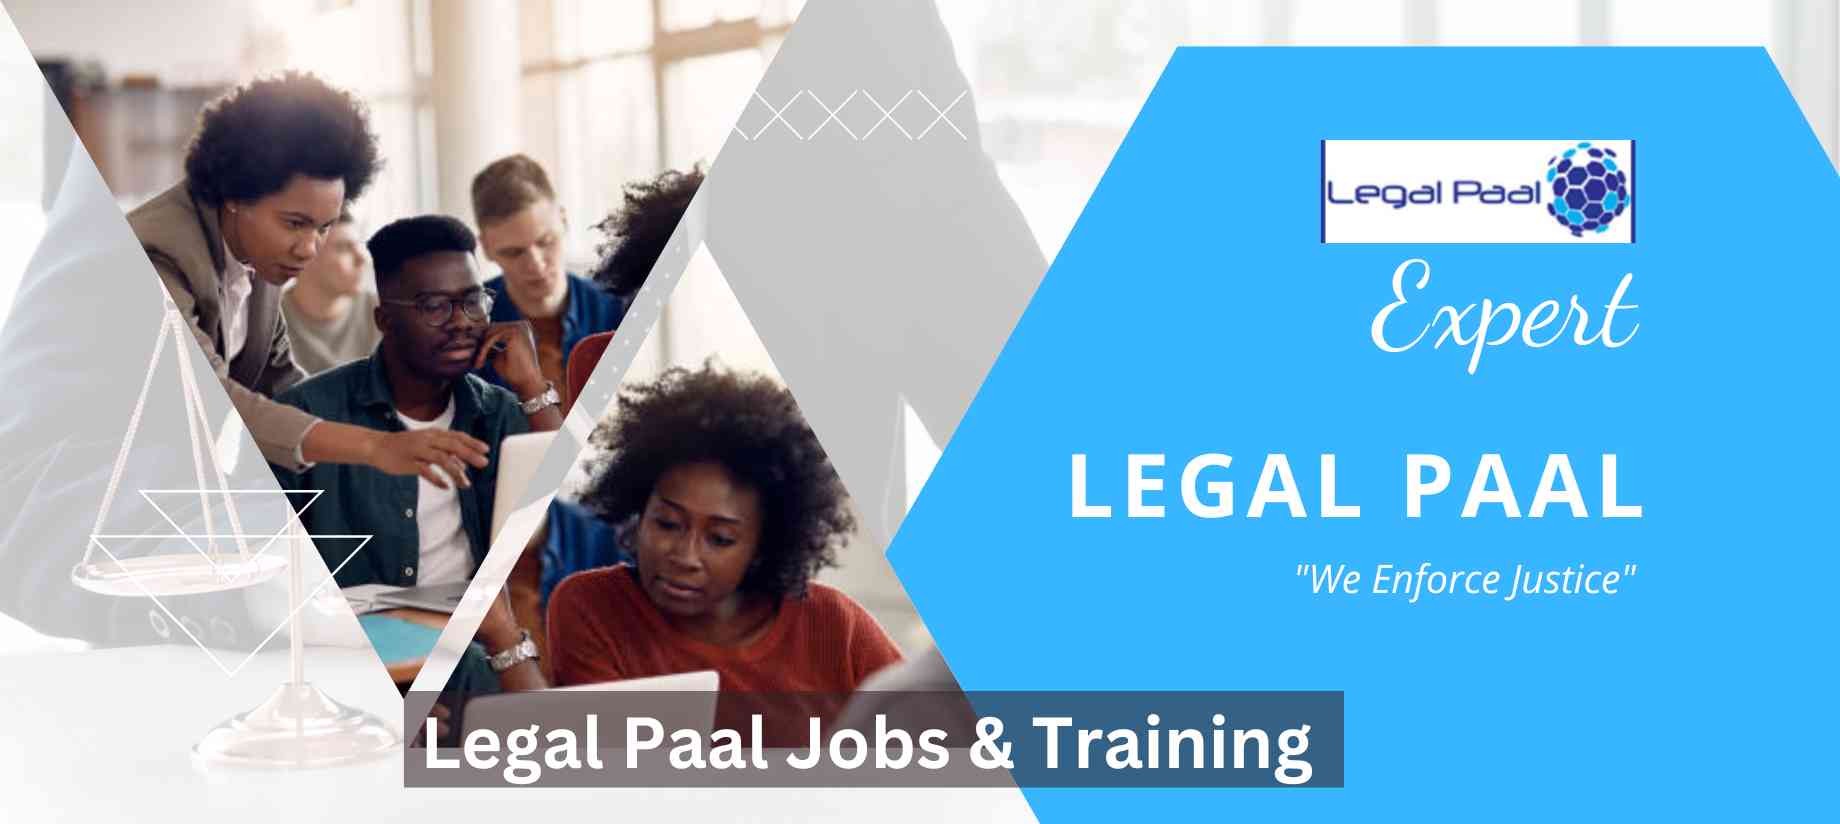 Legal Paal Job & Training - Banner Image on Legal Paal